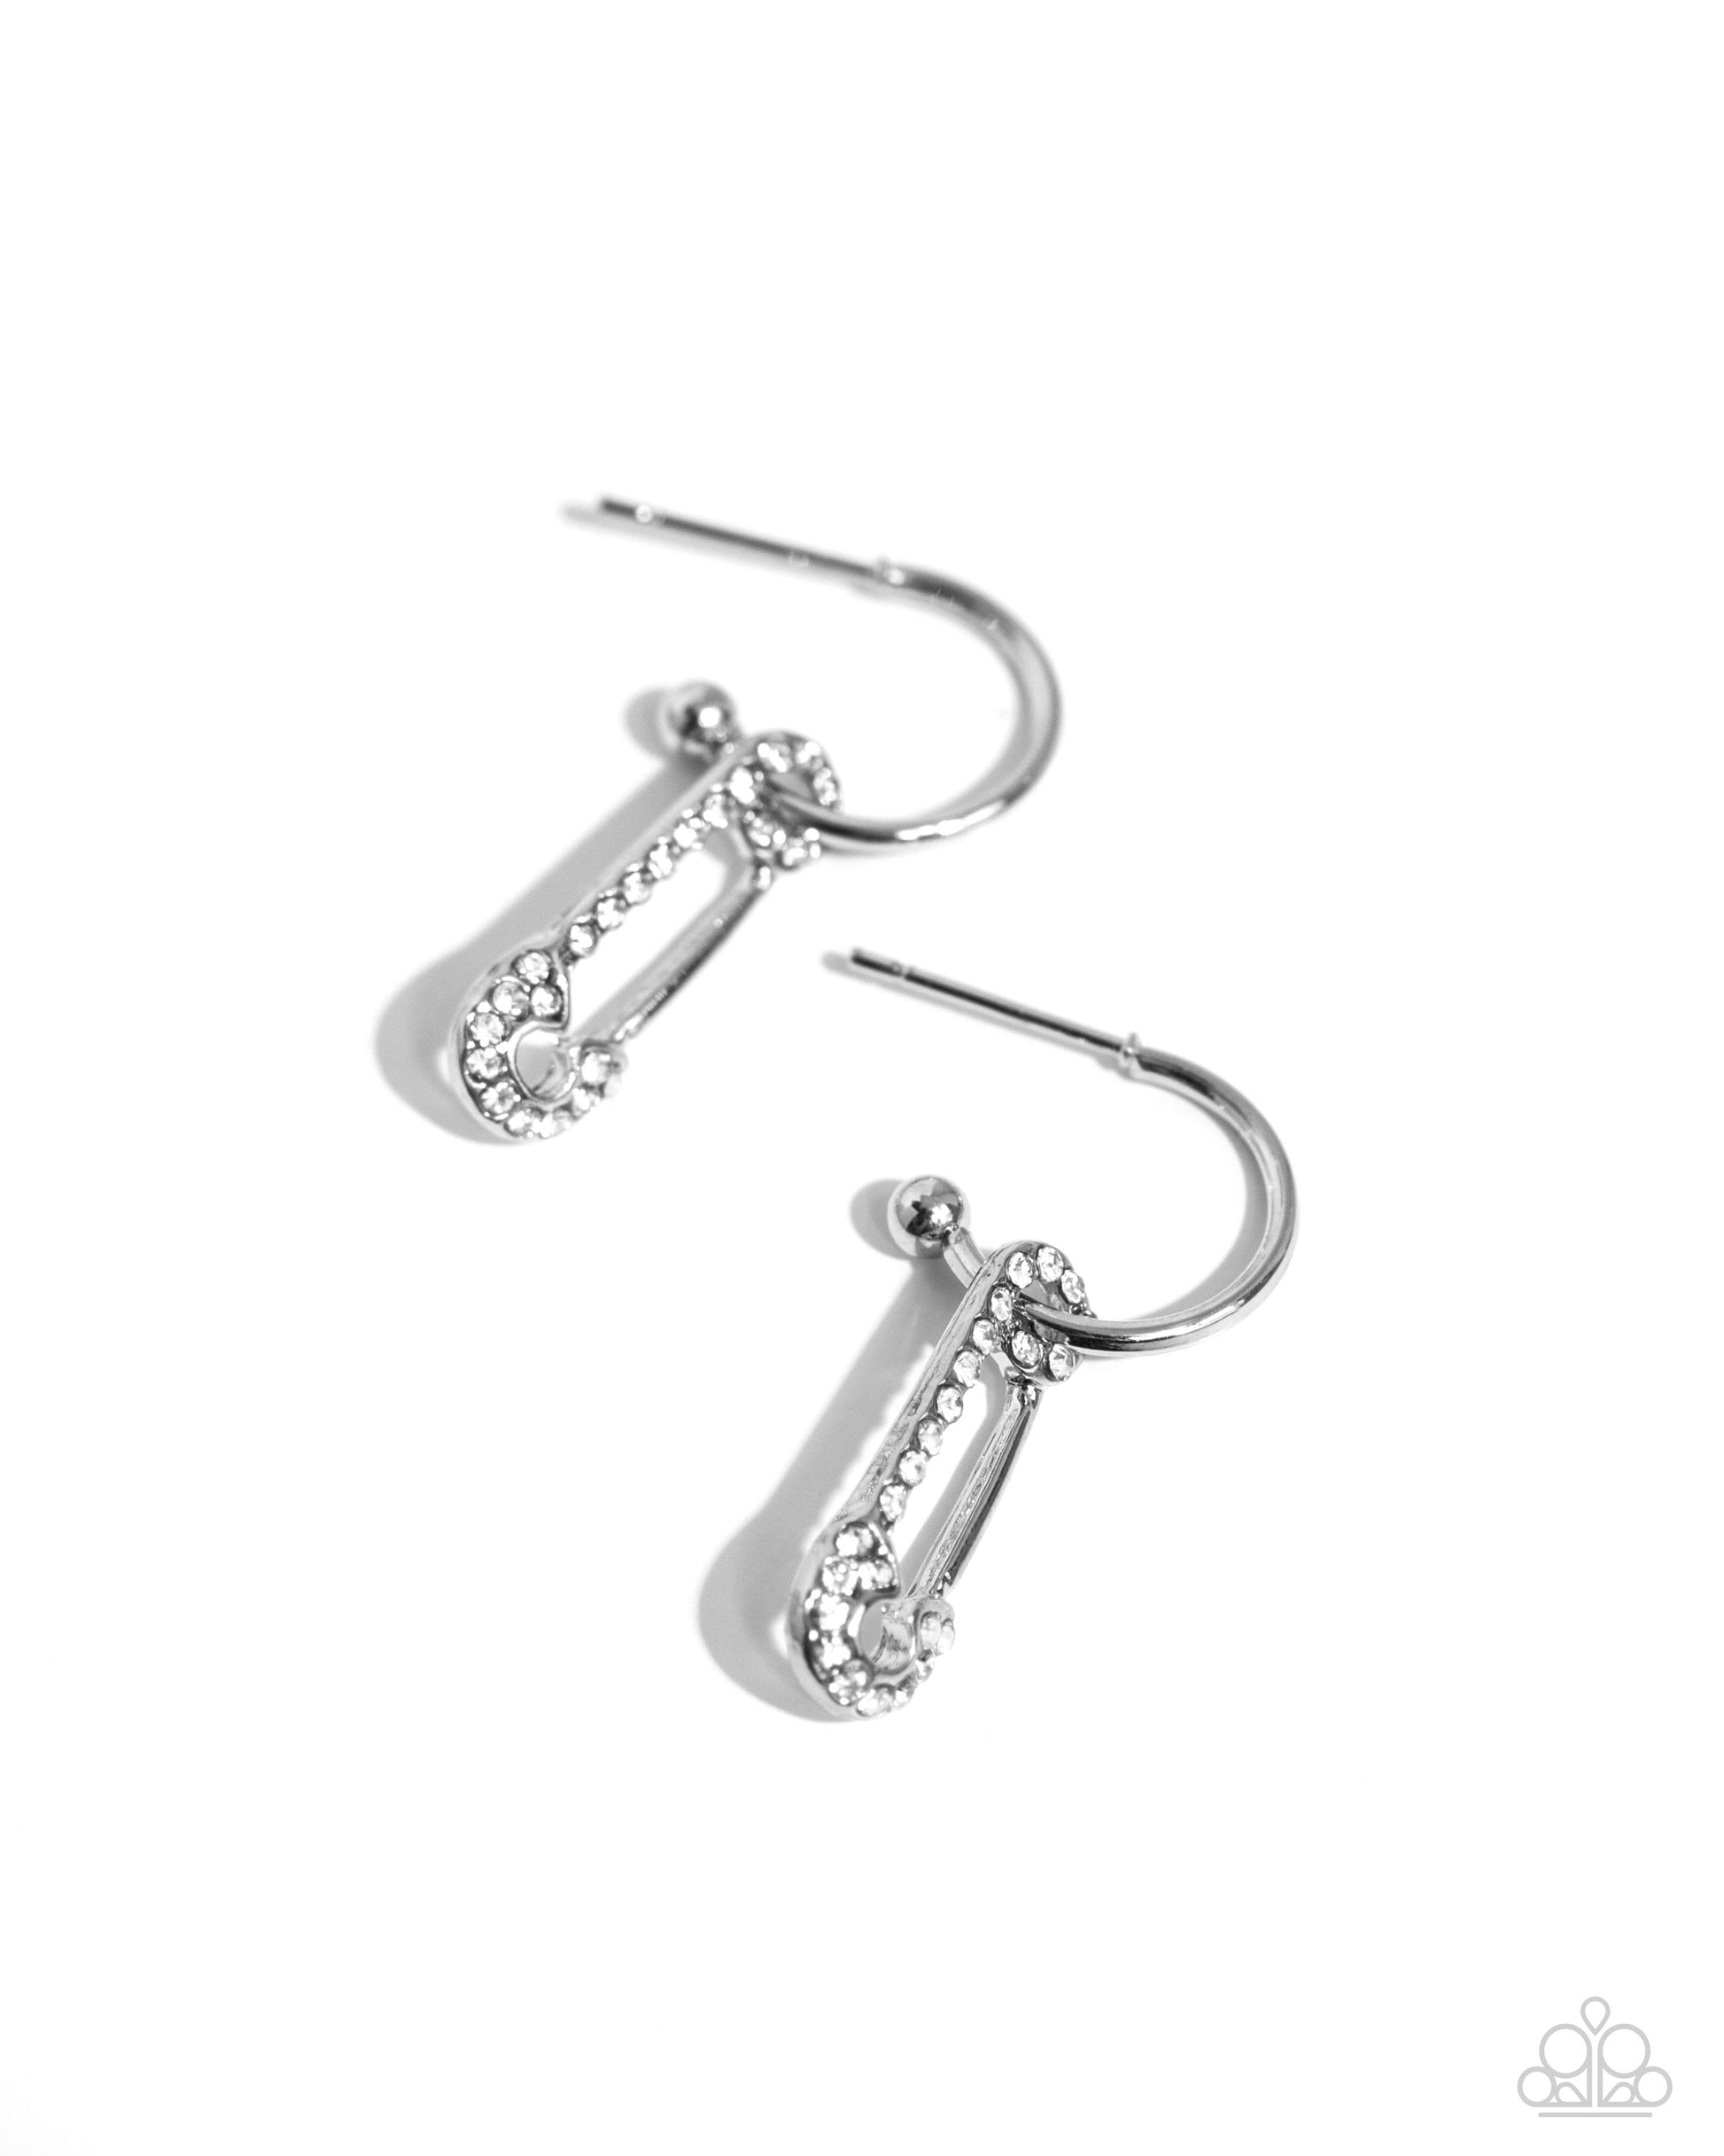 Safety Pin Sentiment White Mini Hoop Earring - Paparazzi Accessories A small, skinny, shiny silver hoop curves around the ear in a timeless fashion. A shiny silver ball is affixed to the end of the hoop, reminiscent of a barbell fitting. A white rhinestone-embellished safety pin charm slides along the curvature of the hoop, adding a surprising hint of edgy movement. Hoop measures approximately 1/2" in diameter. SKU: P5HO-WTXX-175VX Necklace: "Safety Pin Style - White" (Sold Separately)